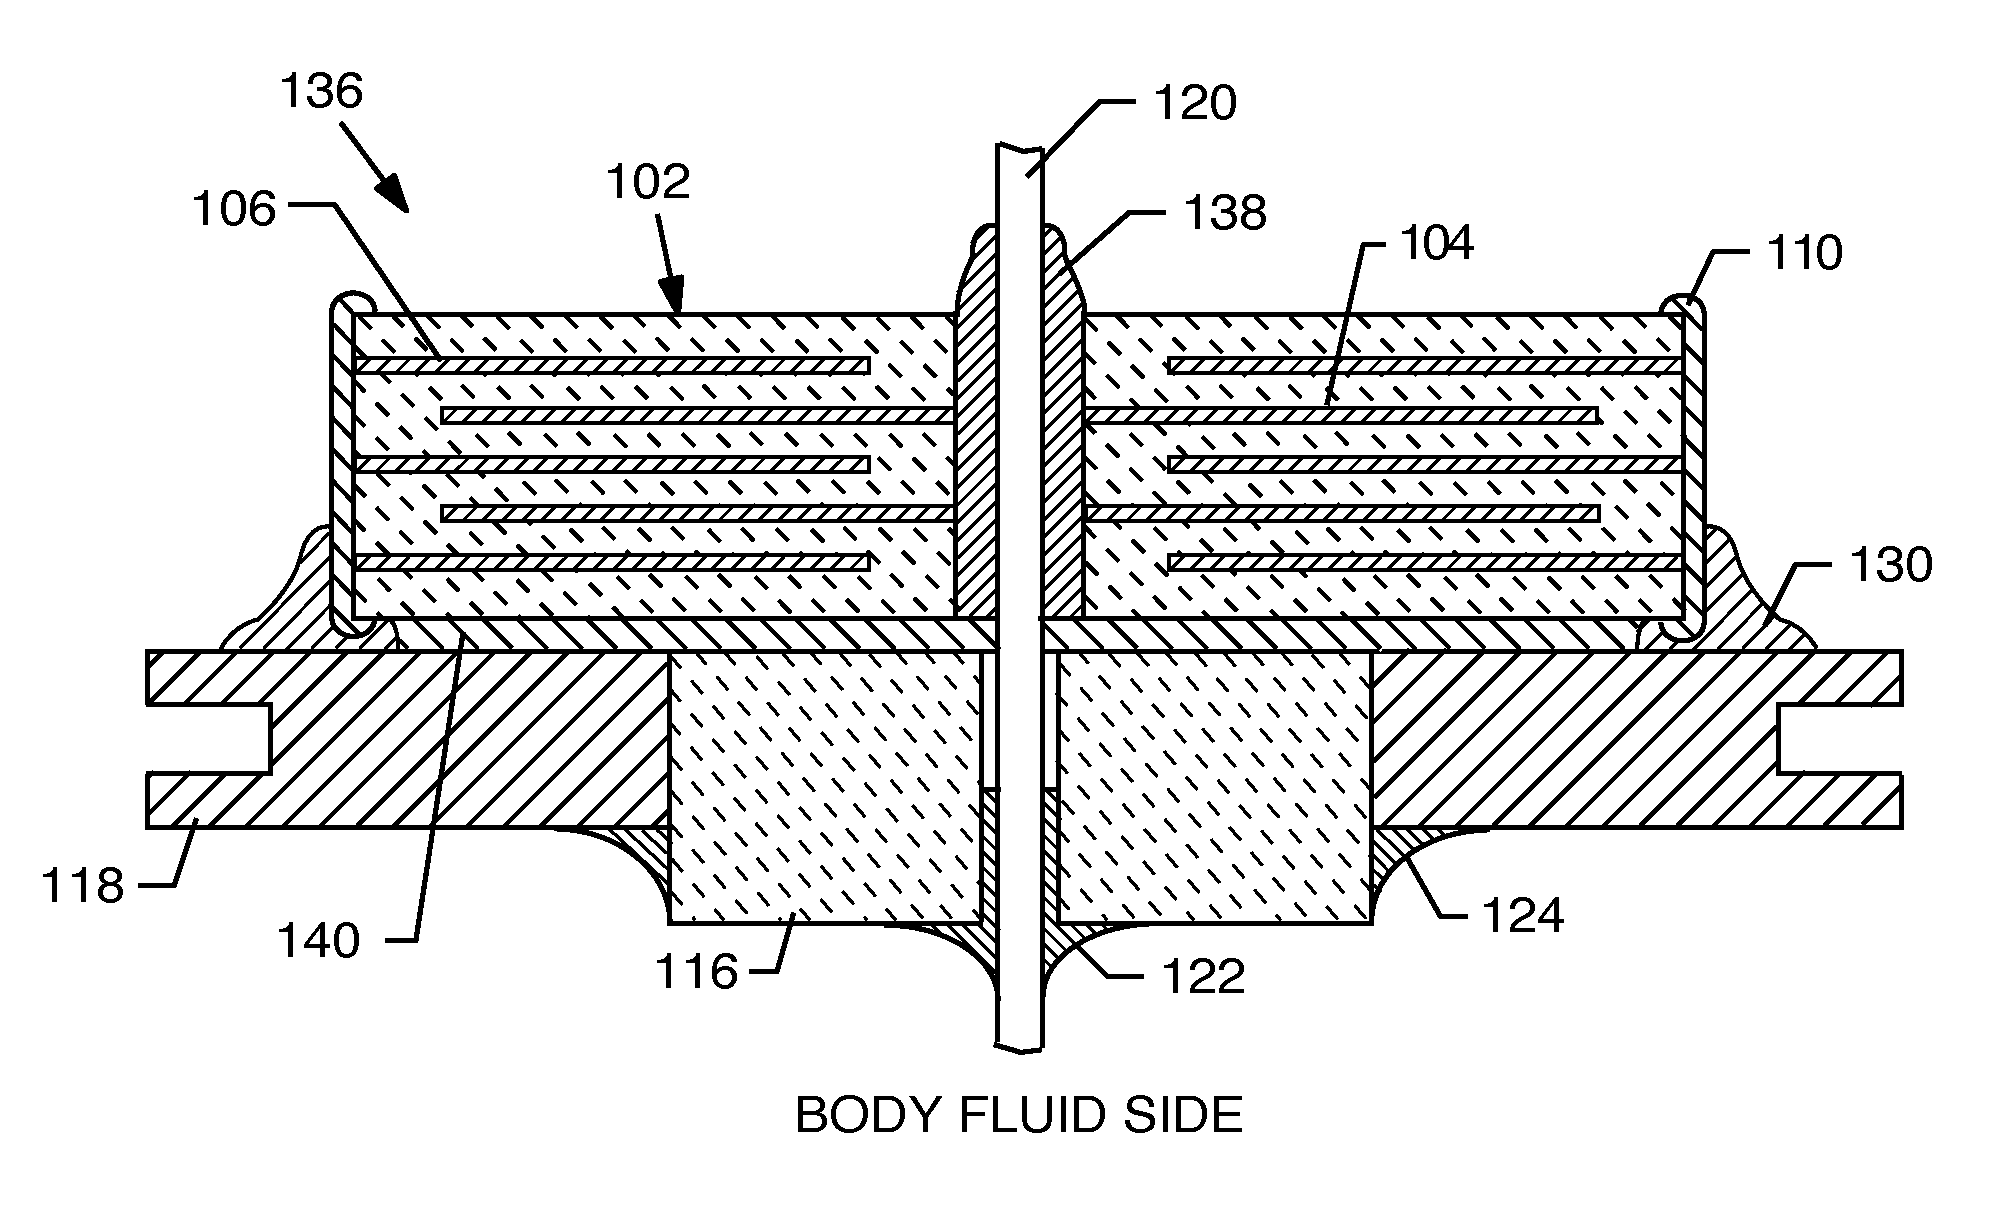 Electromagnetic interference filter and method for attaching a lead and/or a ferrule to capacitor electrodes